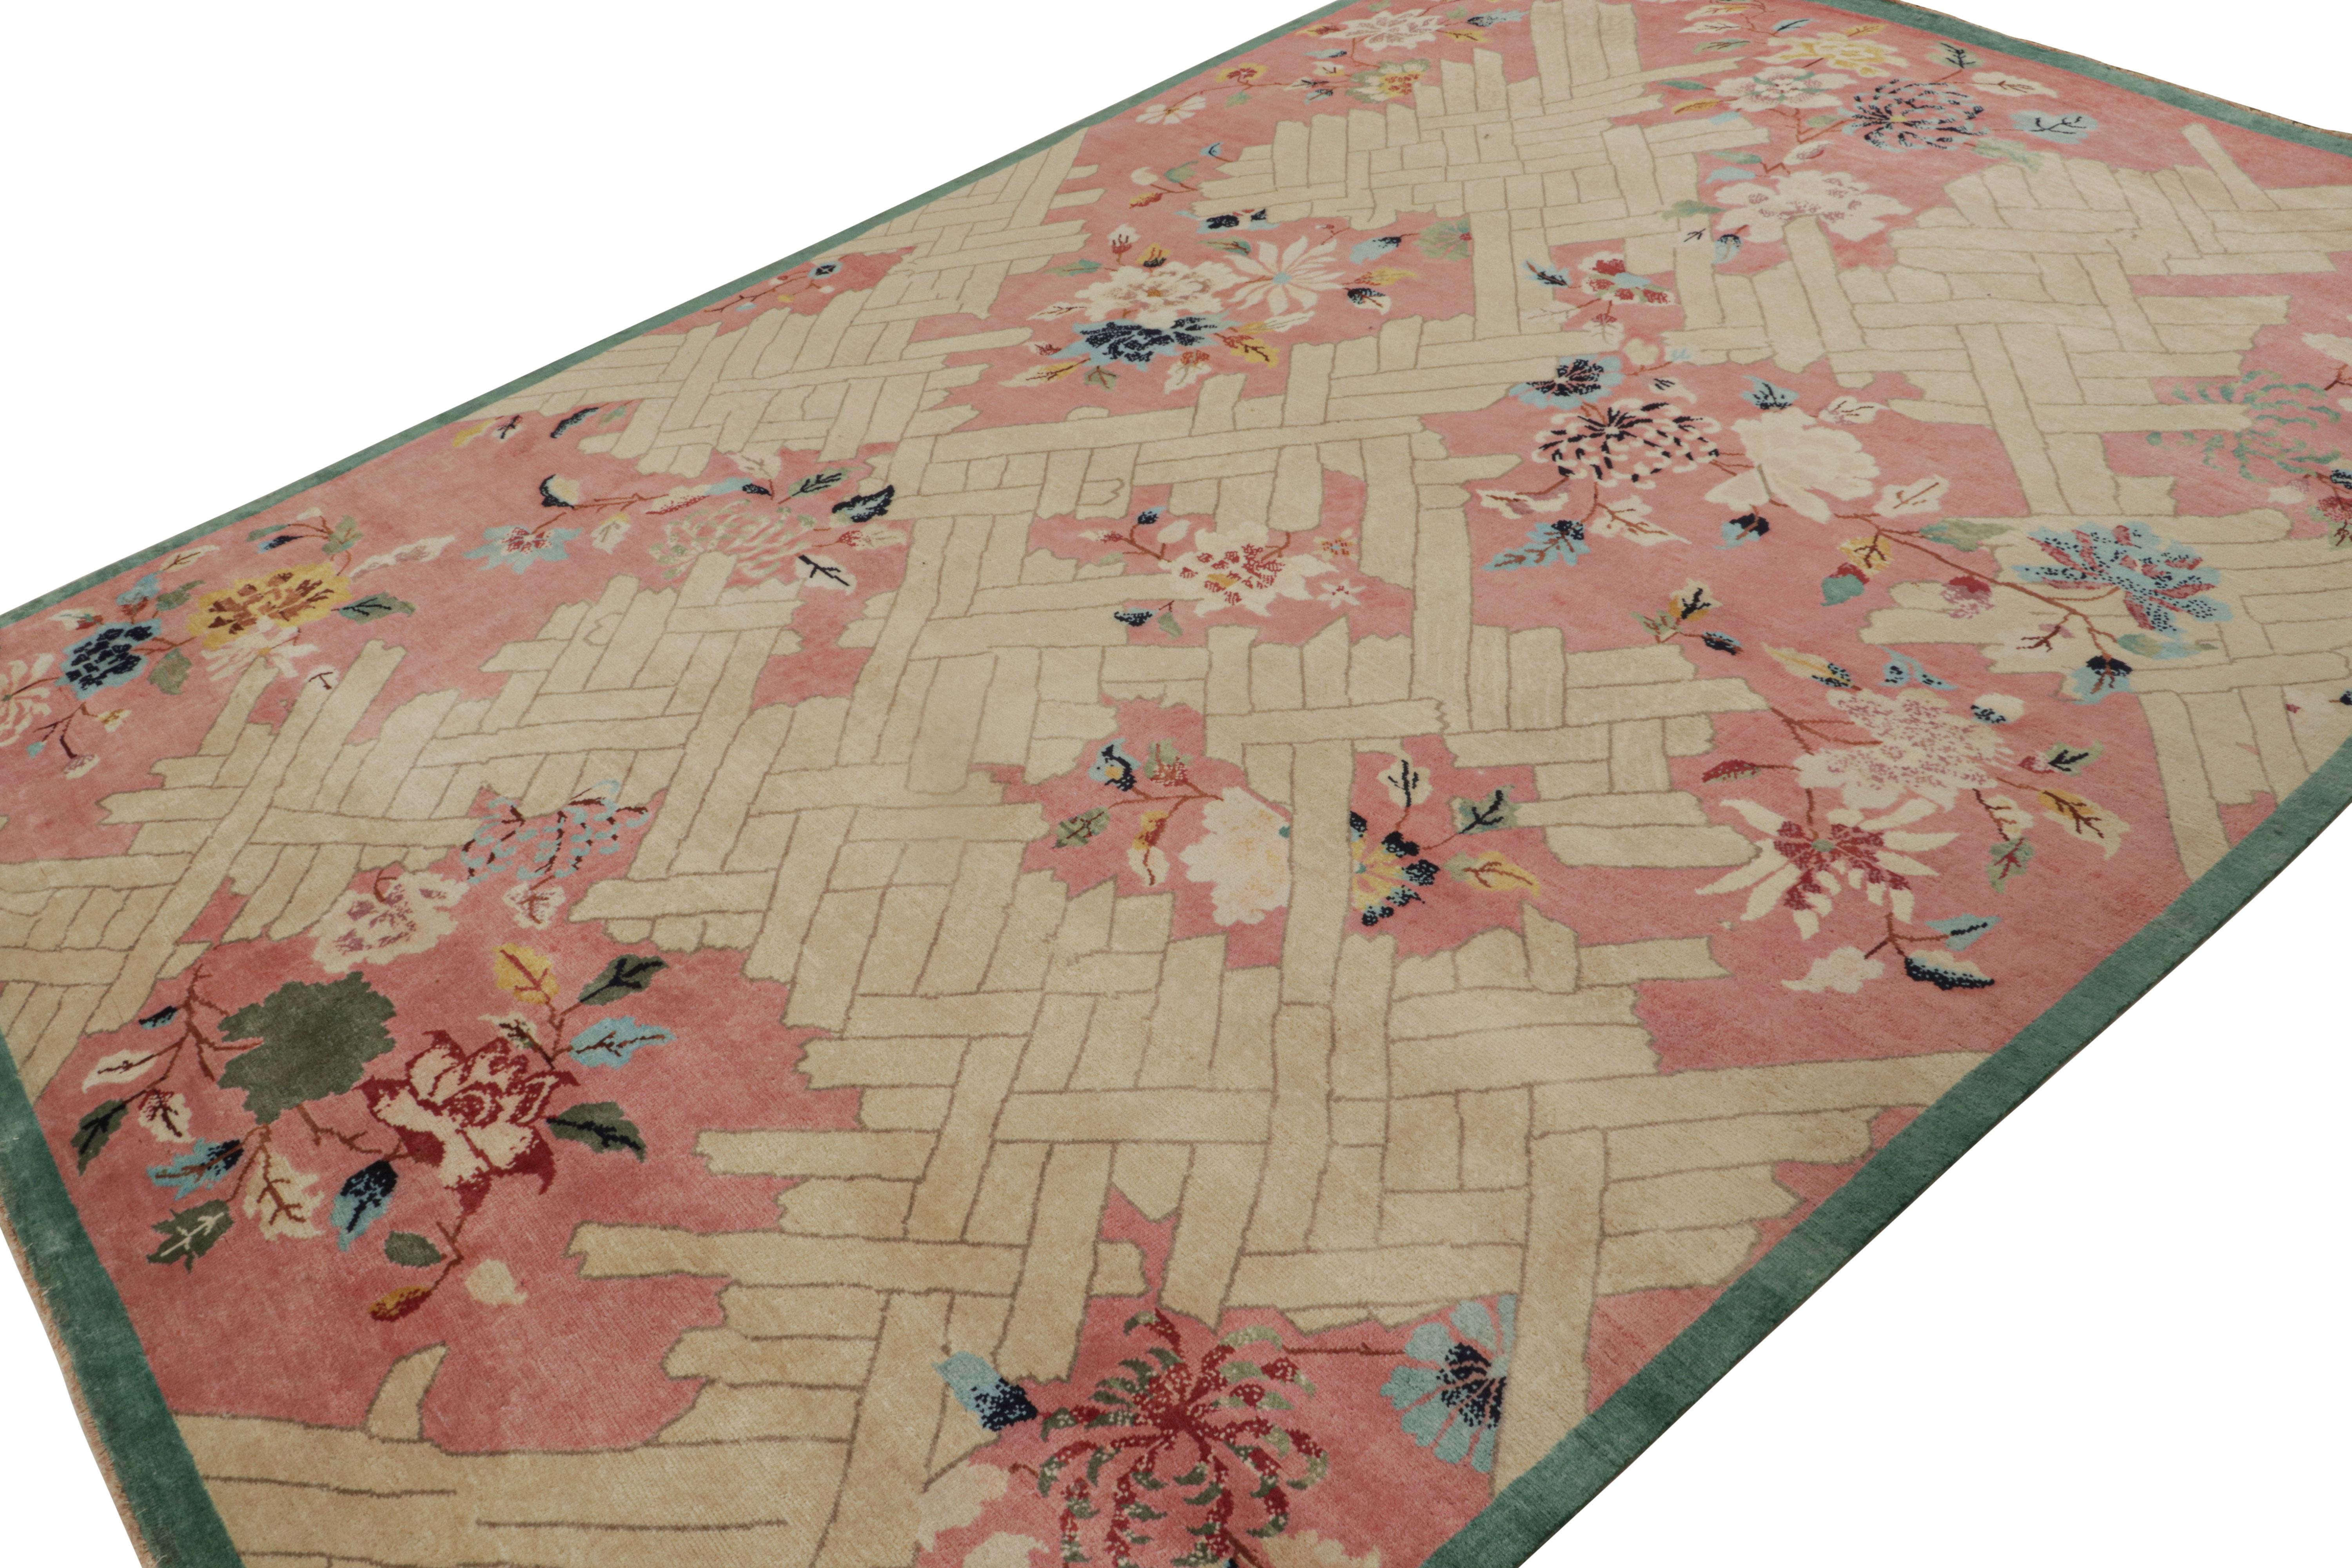 This contemporary 8x12 Chinese Art Deco rug, hand-knotted in wool and cotton, is the next great addition to Rug & Kilim’s repertoire of contemporary creations inspired by the Art Deco movement. 

On the Design: 

Inspired by the venerated 1920s